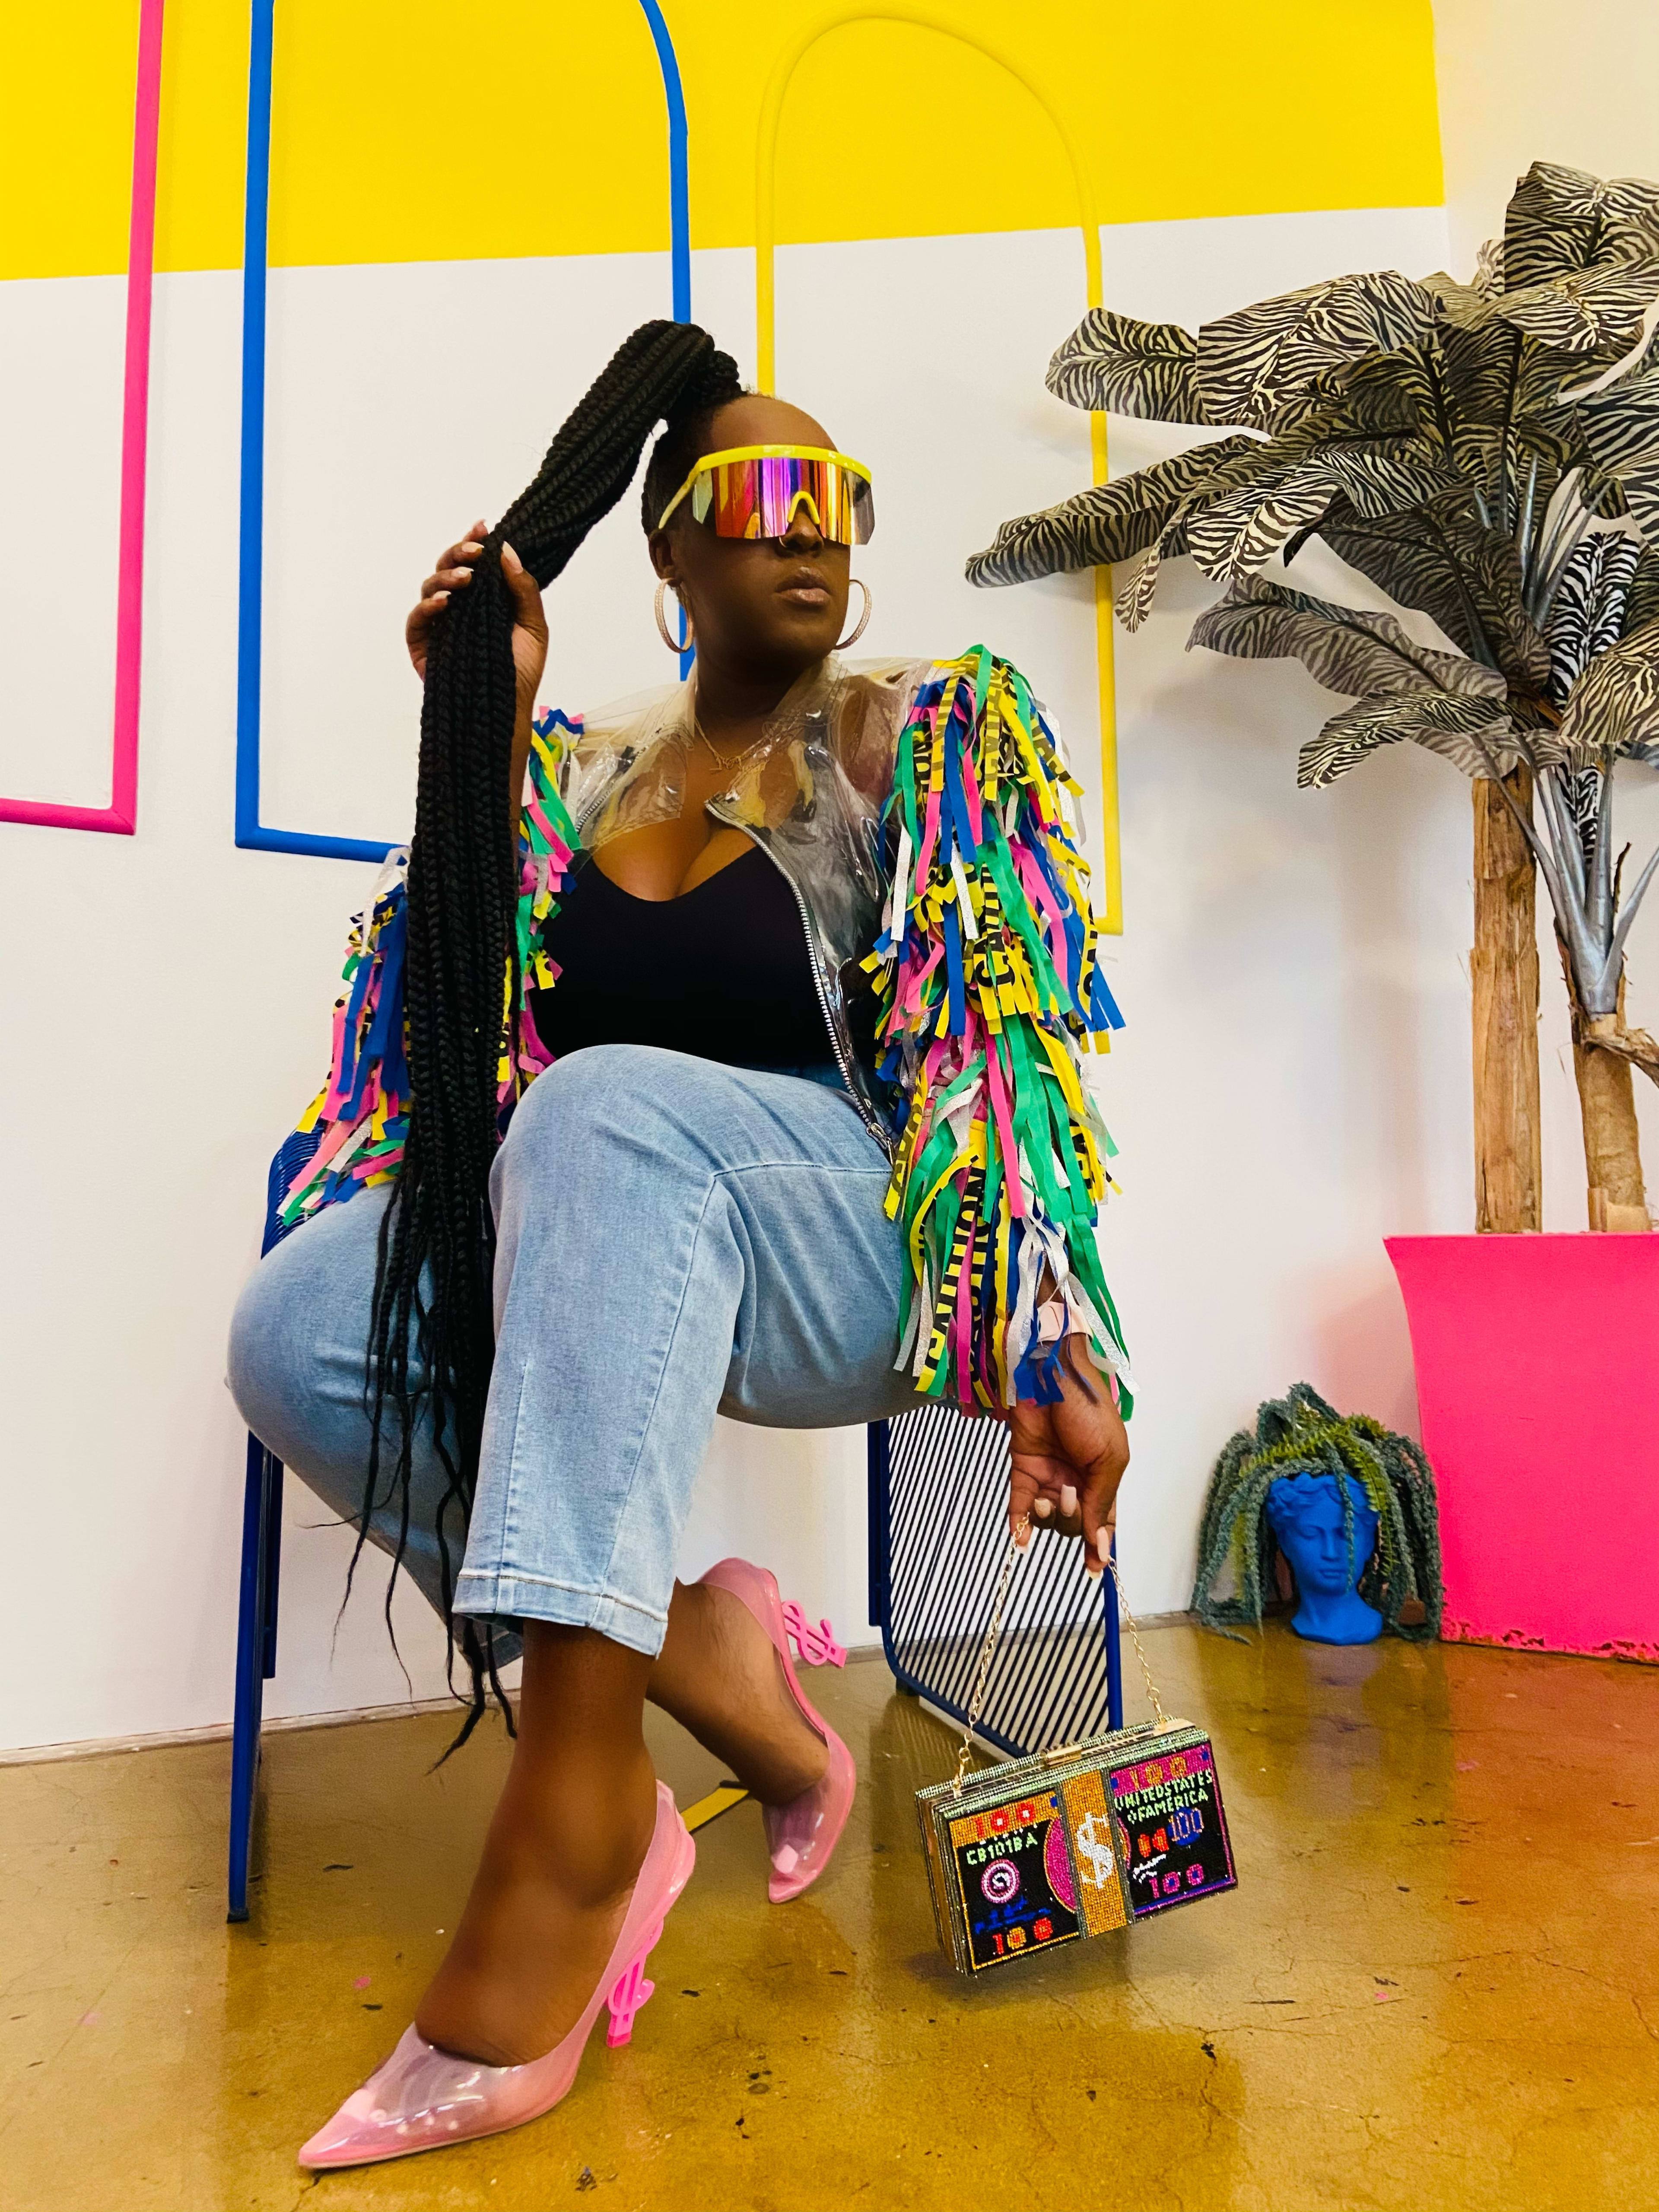 A fashion photo shoot featuring a woman seated in a chair wearing neon sunglasses.